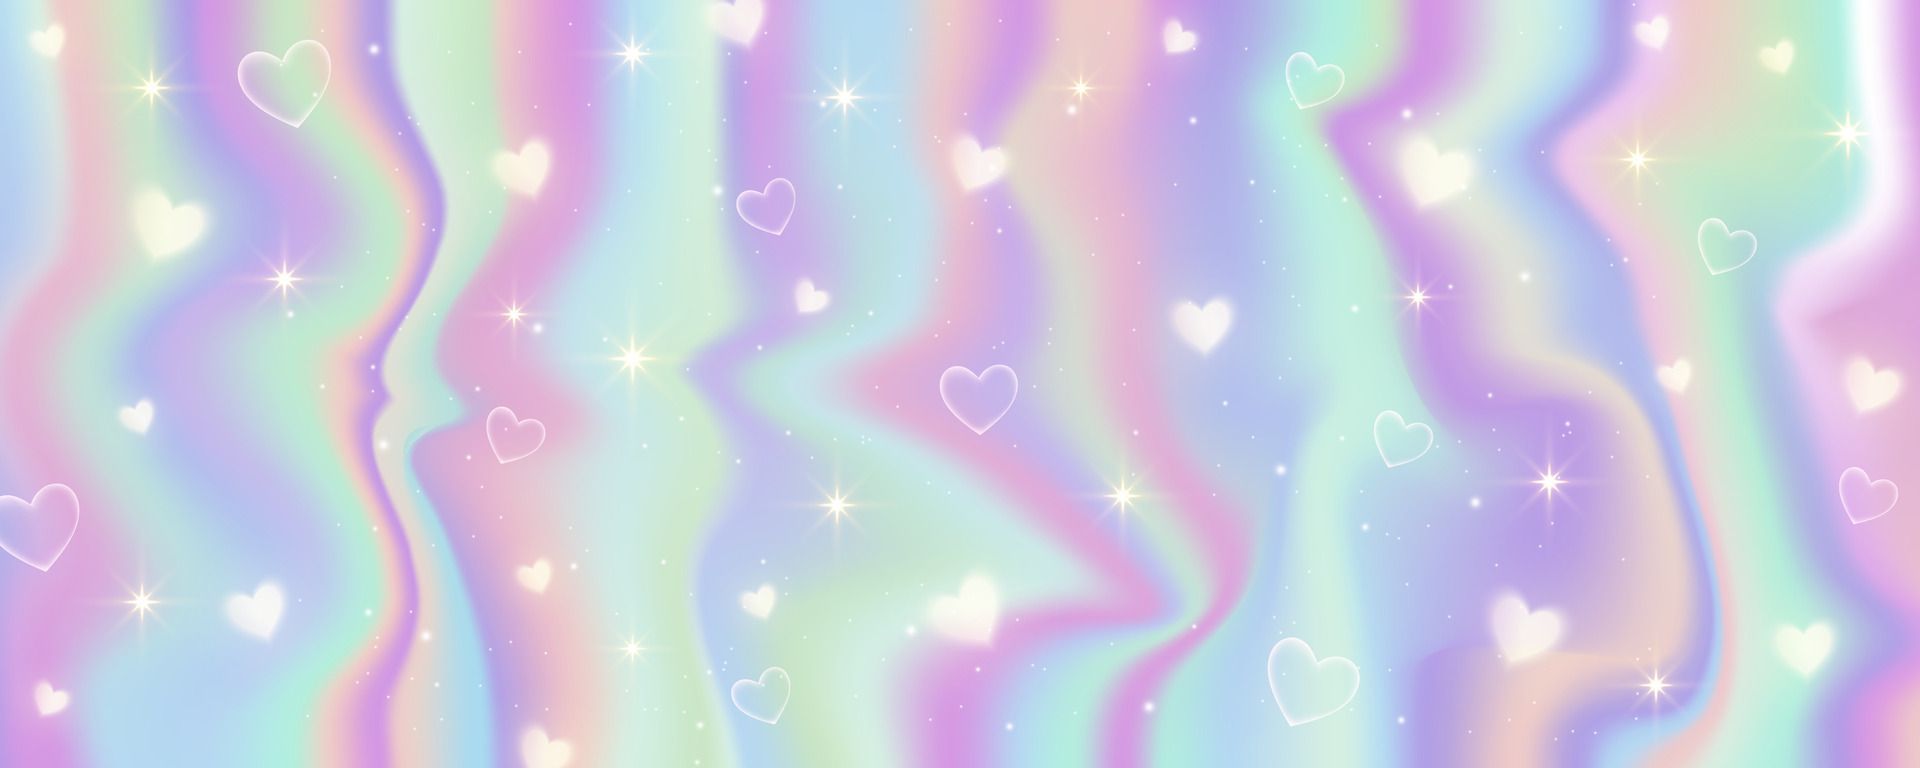 Hologram texture background with stars and sparkles. Iridescent striped gradient. Neon rainbow pastel foil. Unicorn pearl wallpaper. Vector